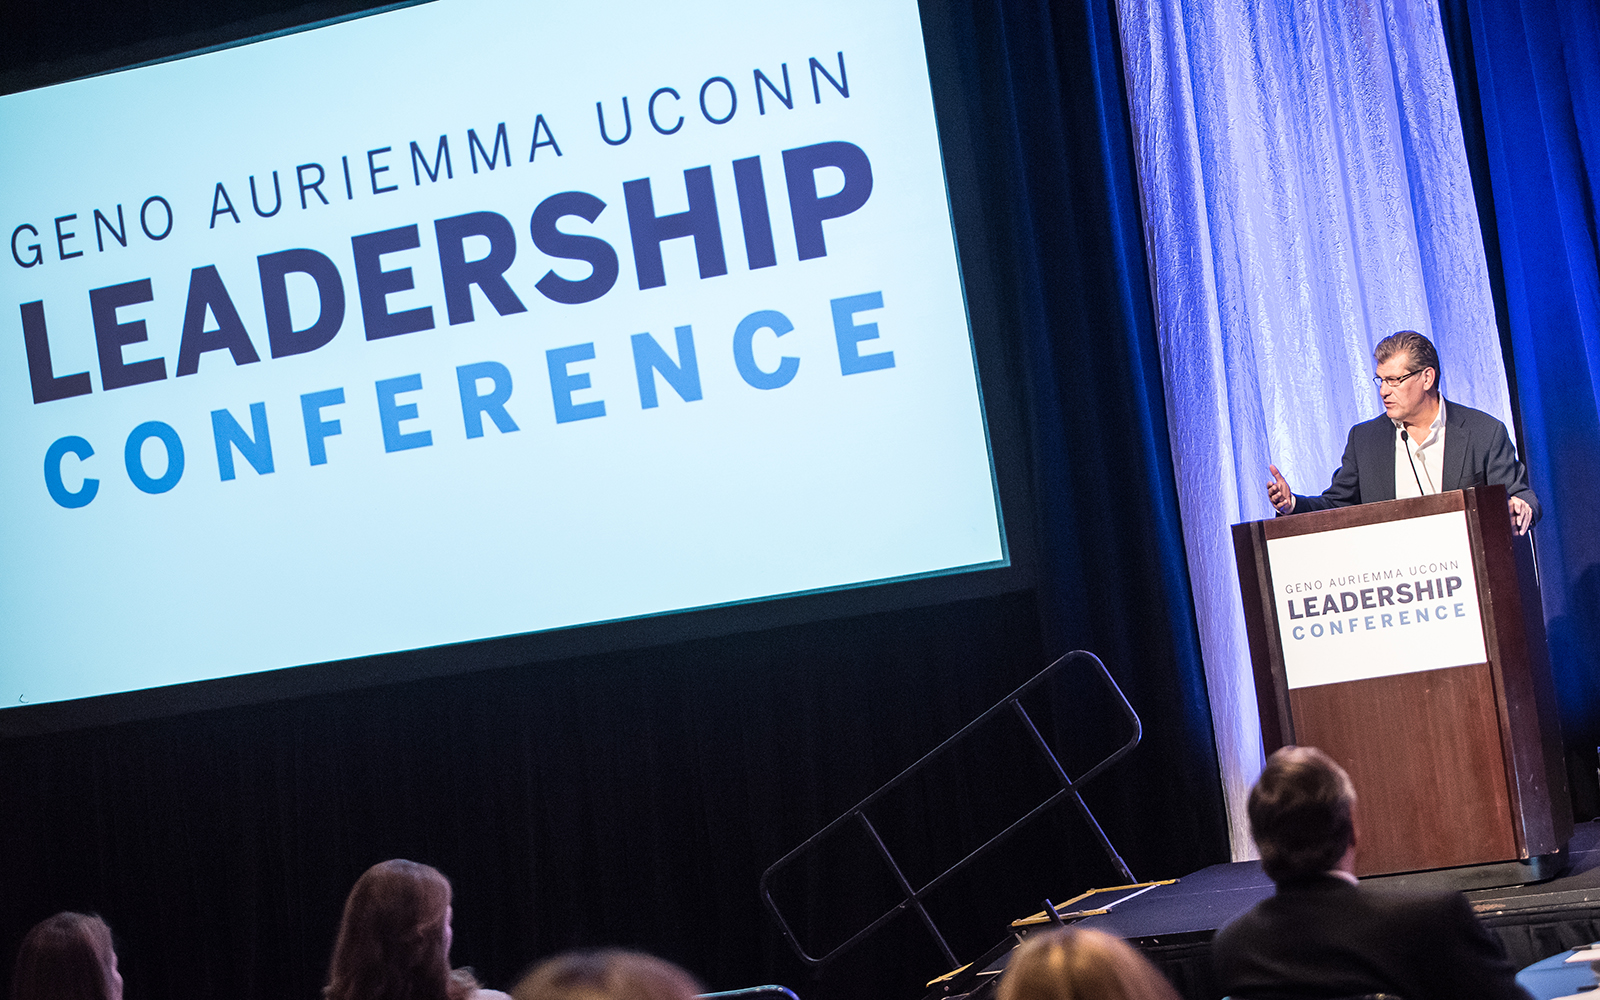 The third Geno Auriemma UConn Leadership Conference was held in October at Mohegan Sun, attracting some of the world's top executives from a vast variety of industries. (Nathan Oldham/UConn School of Business)